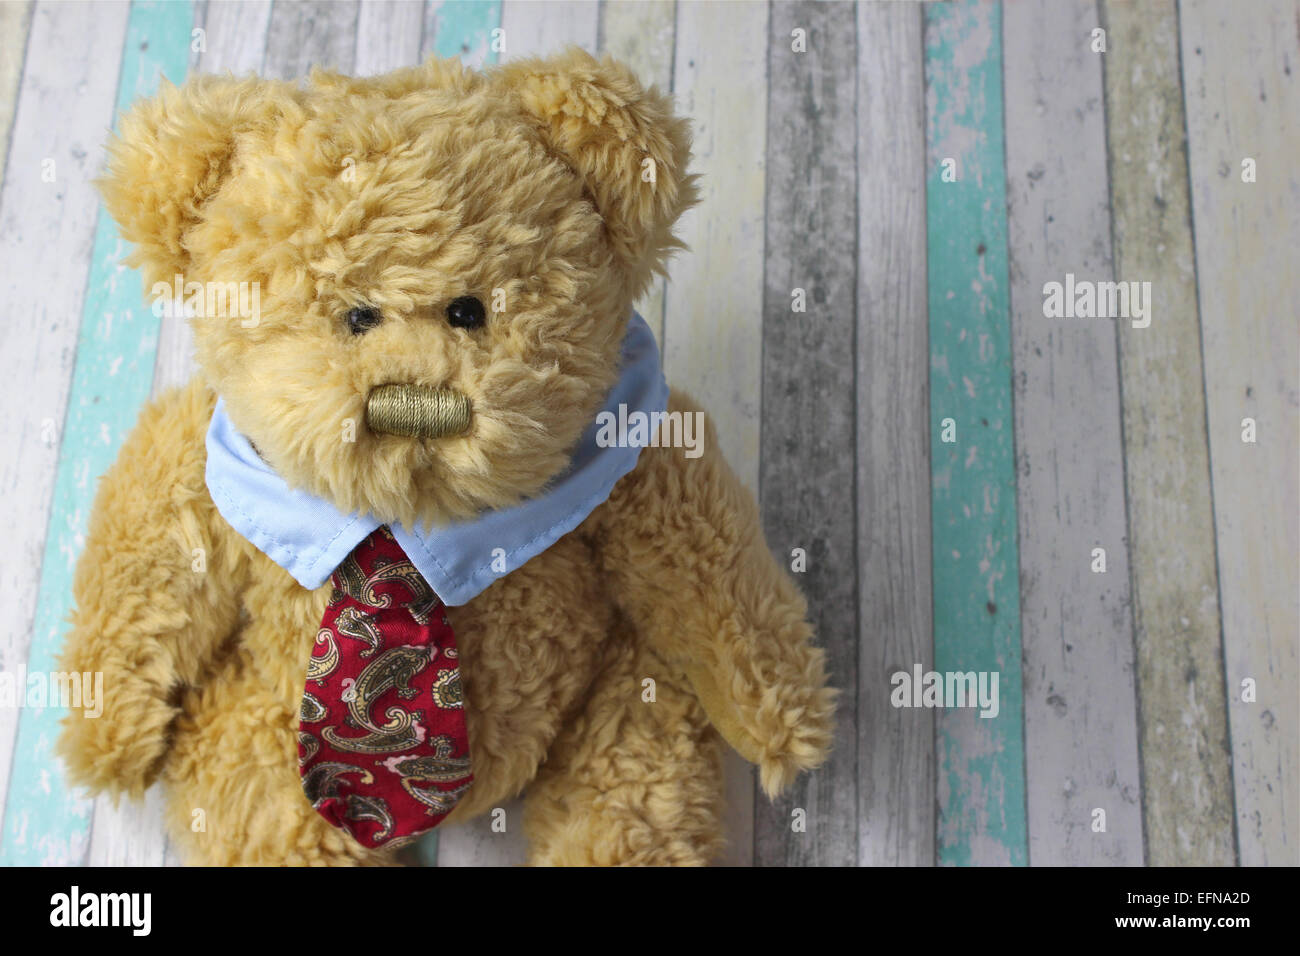 Office teddy bear dressed in shirt and tie against a rustic wooden background. Stock Photo